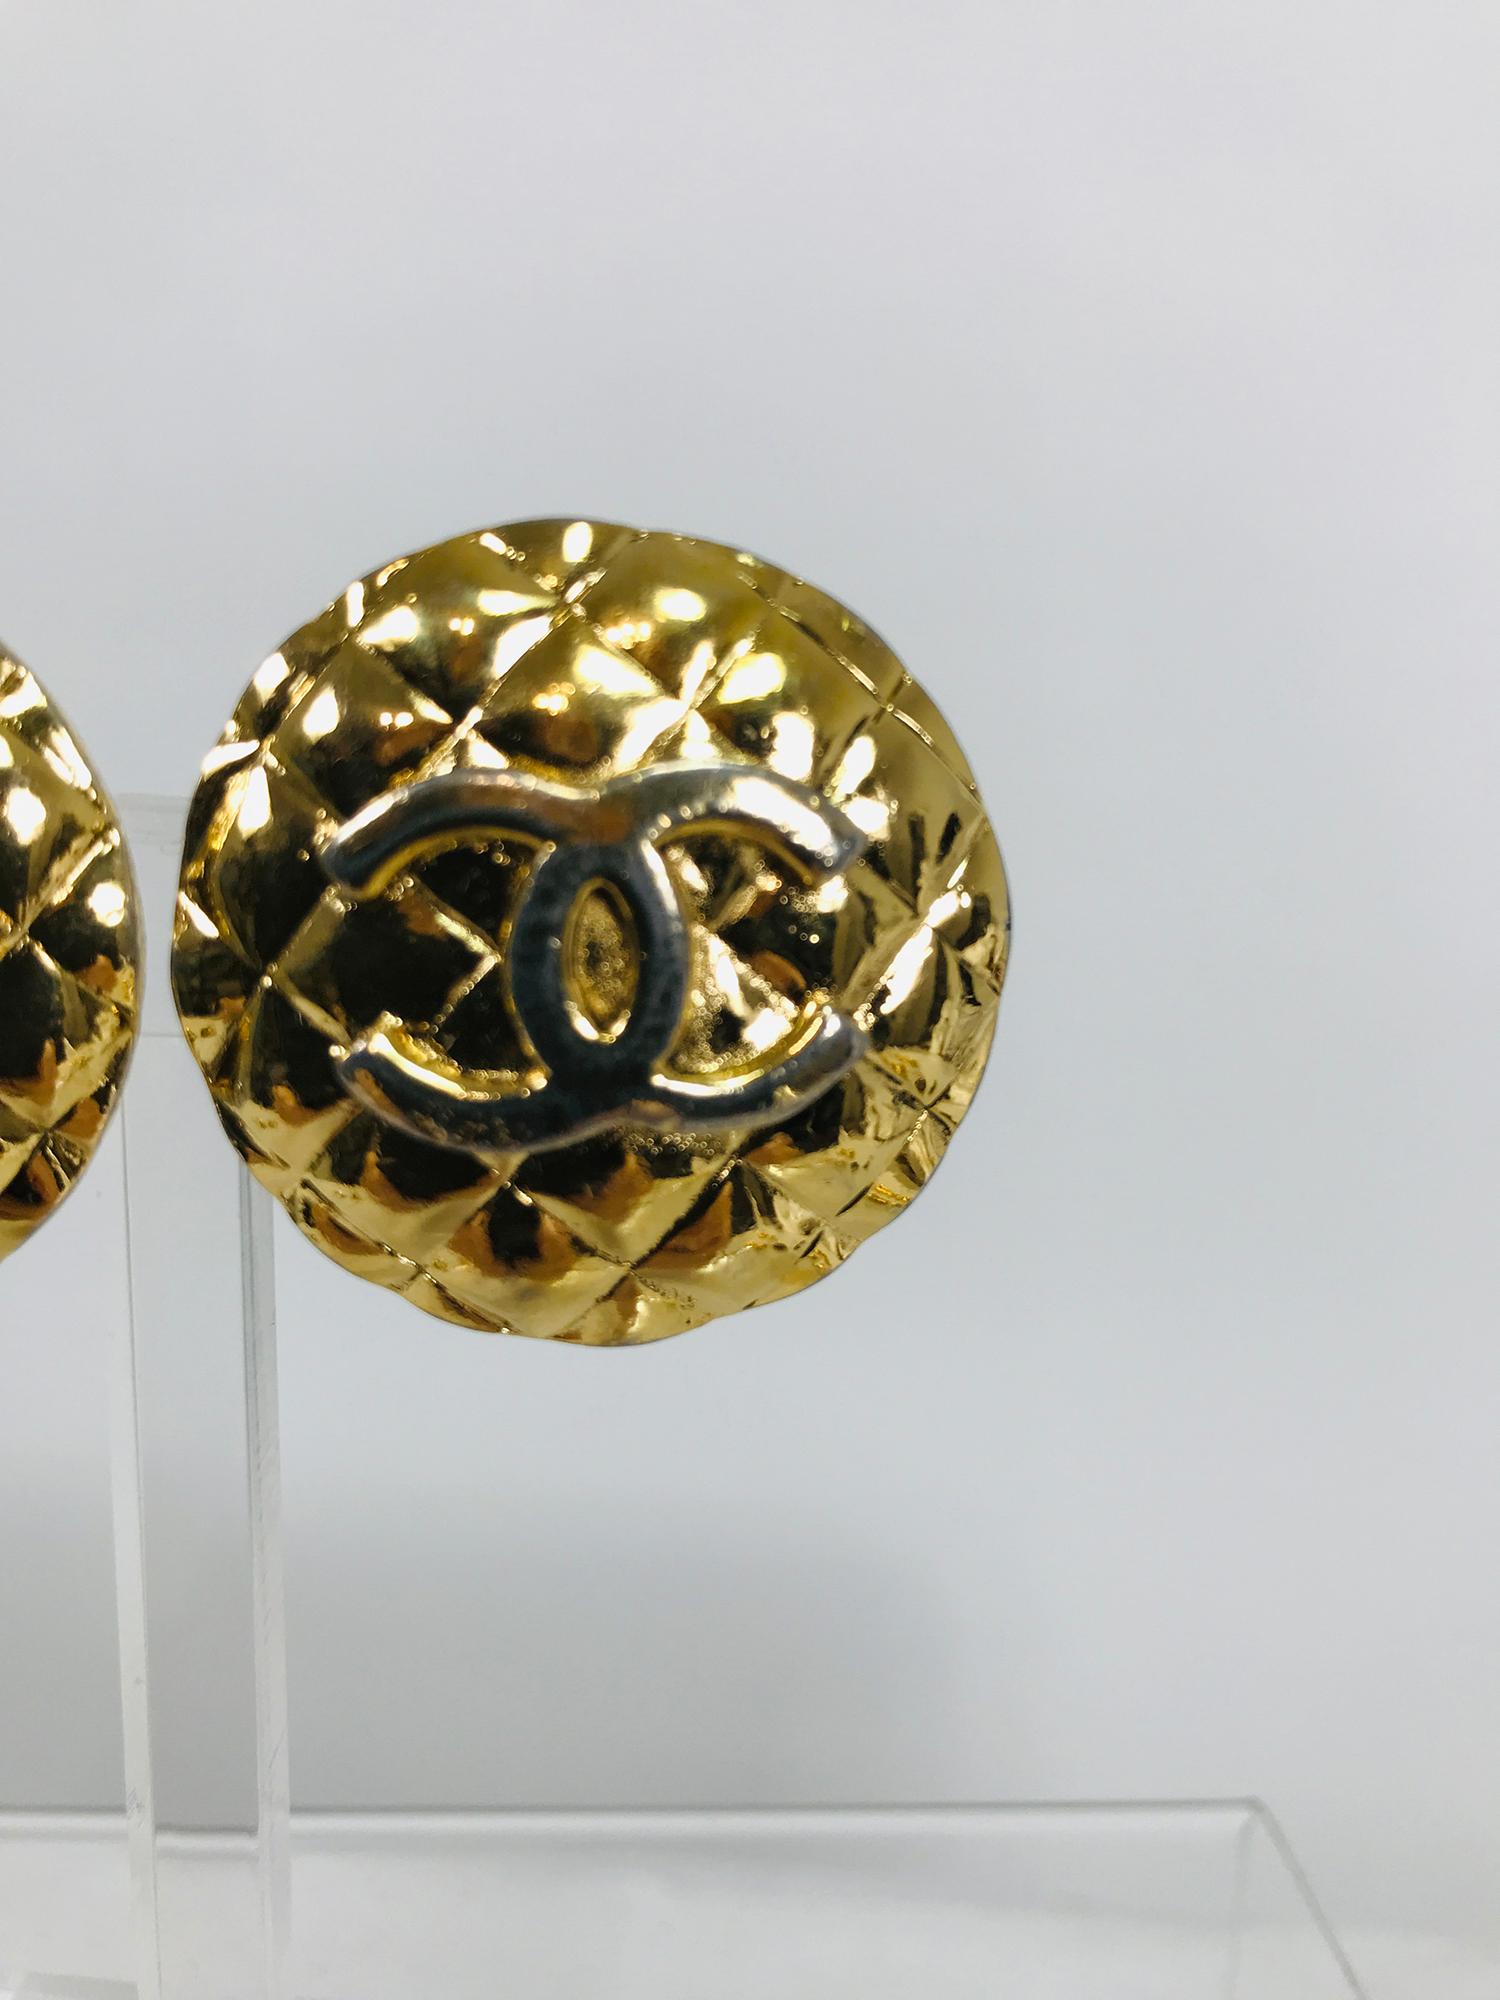 Vintage Chanel large round goldtone quilted raised logo clip back earrings from the 1960s. Beautiful earrings are simply marked Chanel in capital letters on the back bar of each earring. Each measures 1 1/2